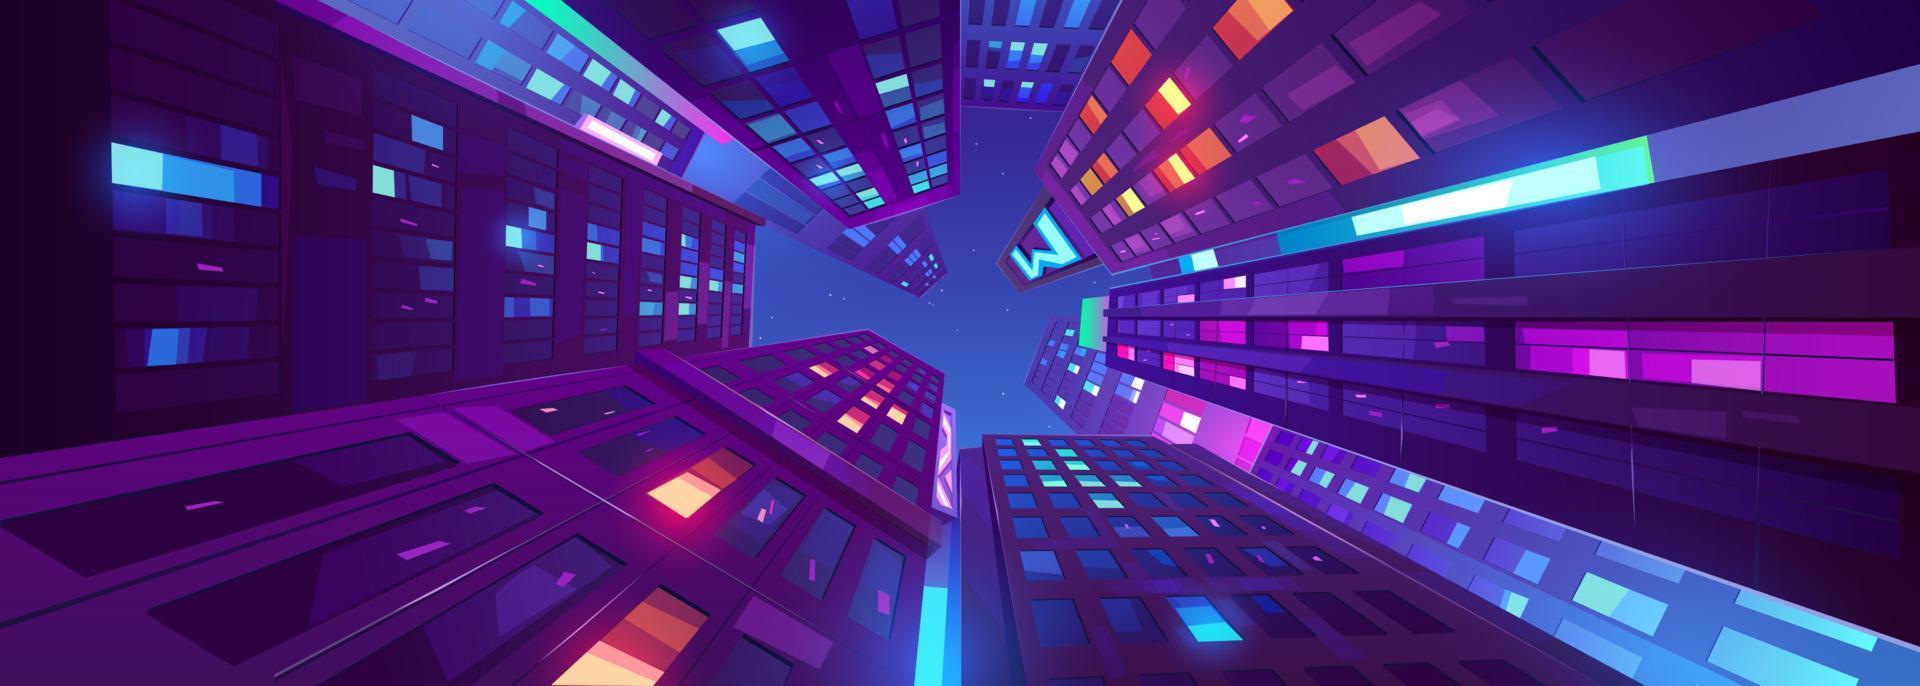 City buildings view from below at night vector